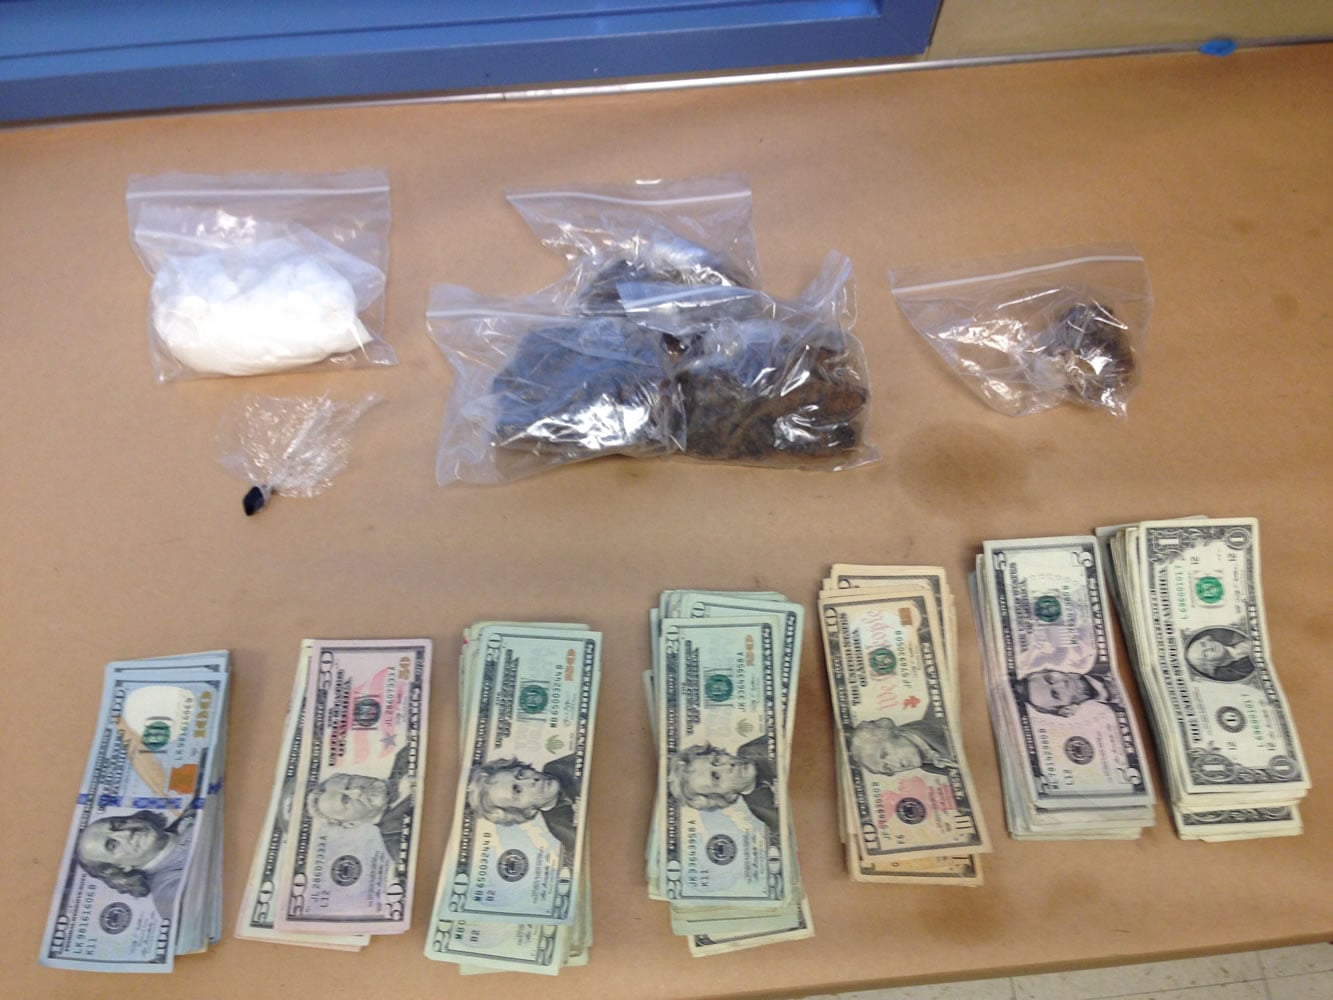 Drugs and cash located in Vancouver Thursday in a search connected to a drug dealing investigation. Officers recovered about 5 ounces of cocaine, 1 3/4 pounds of heroin and more than $7,000 in cash.